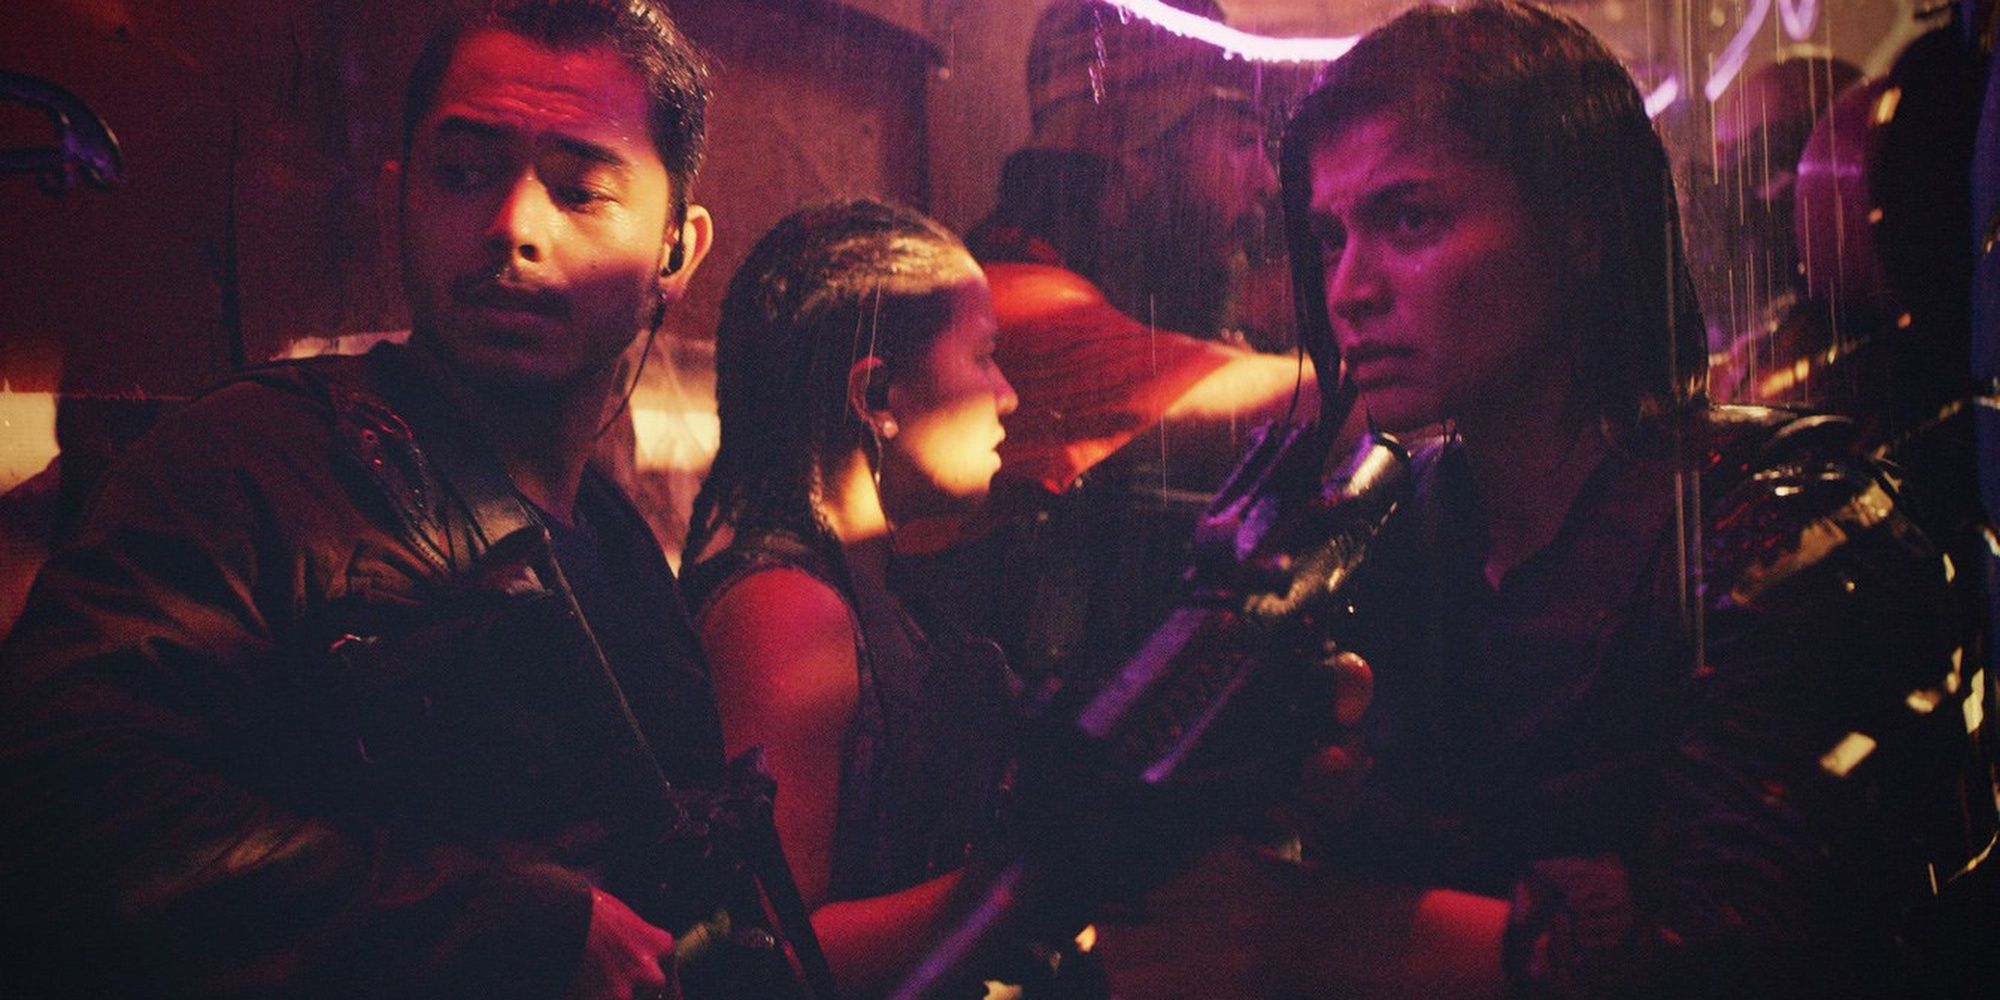 The cast of Buybust armed with guns